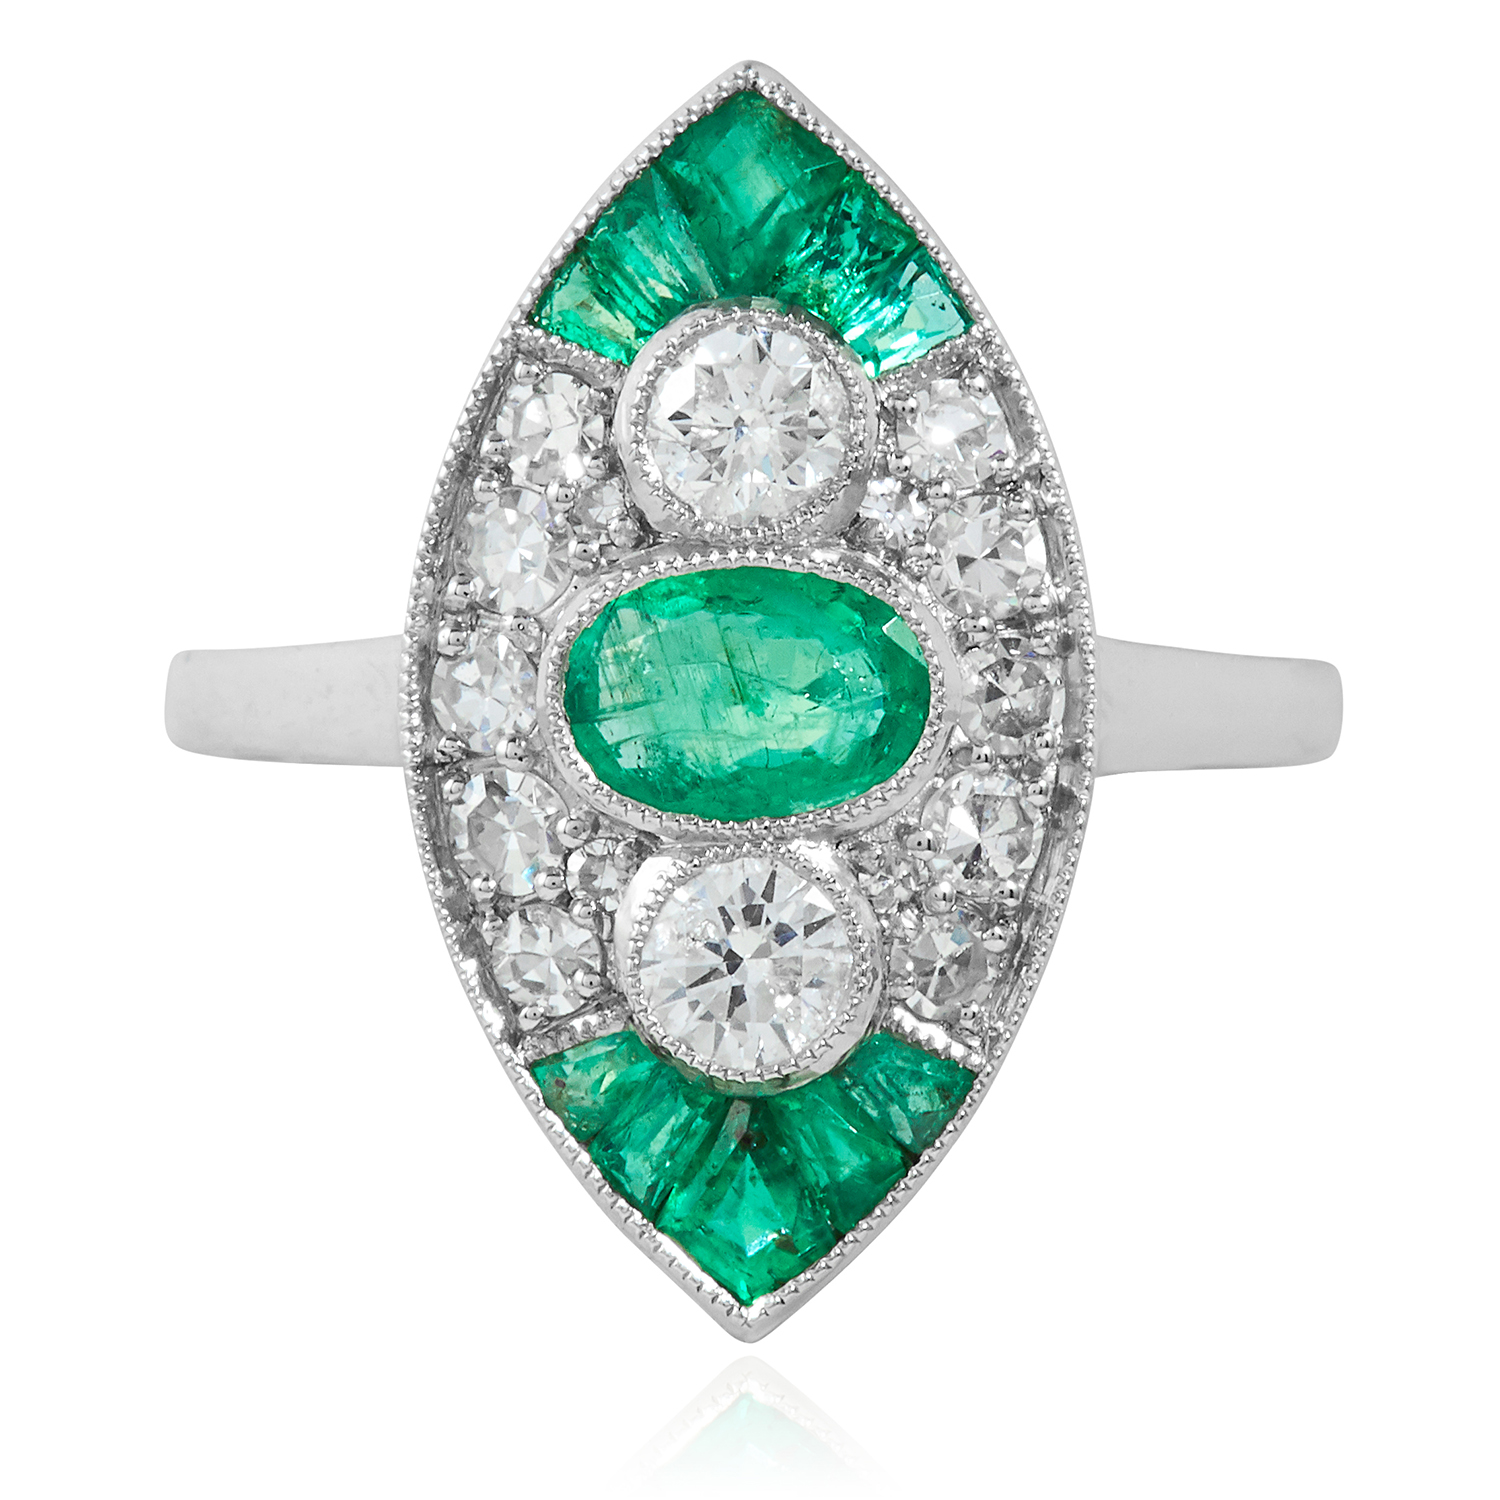 AN ART DECO EMERALD AND DIAMOND RING in platinum or white gold, the navette face set with an oval